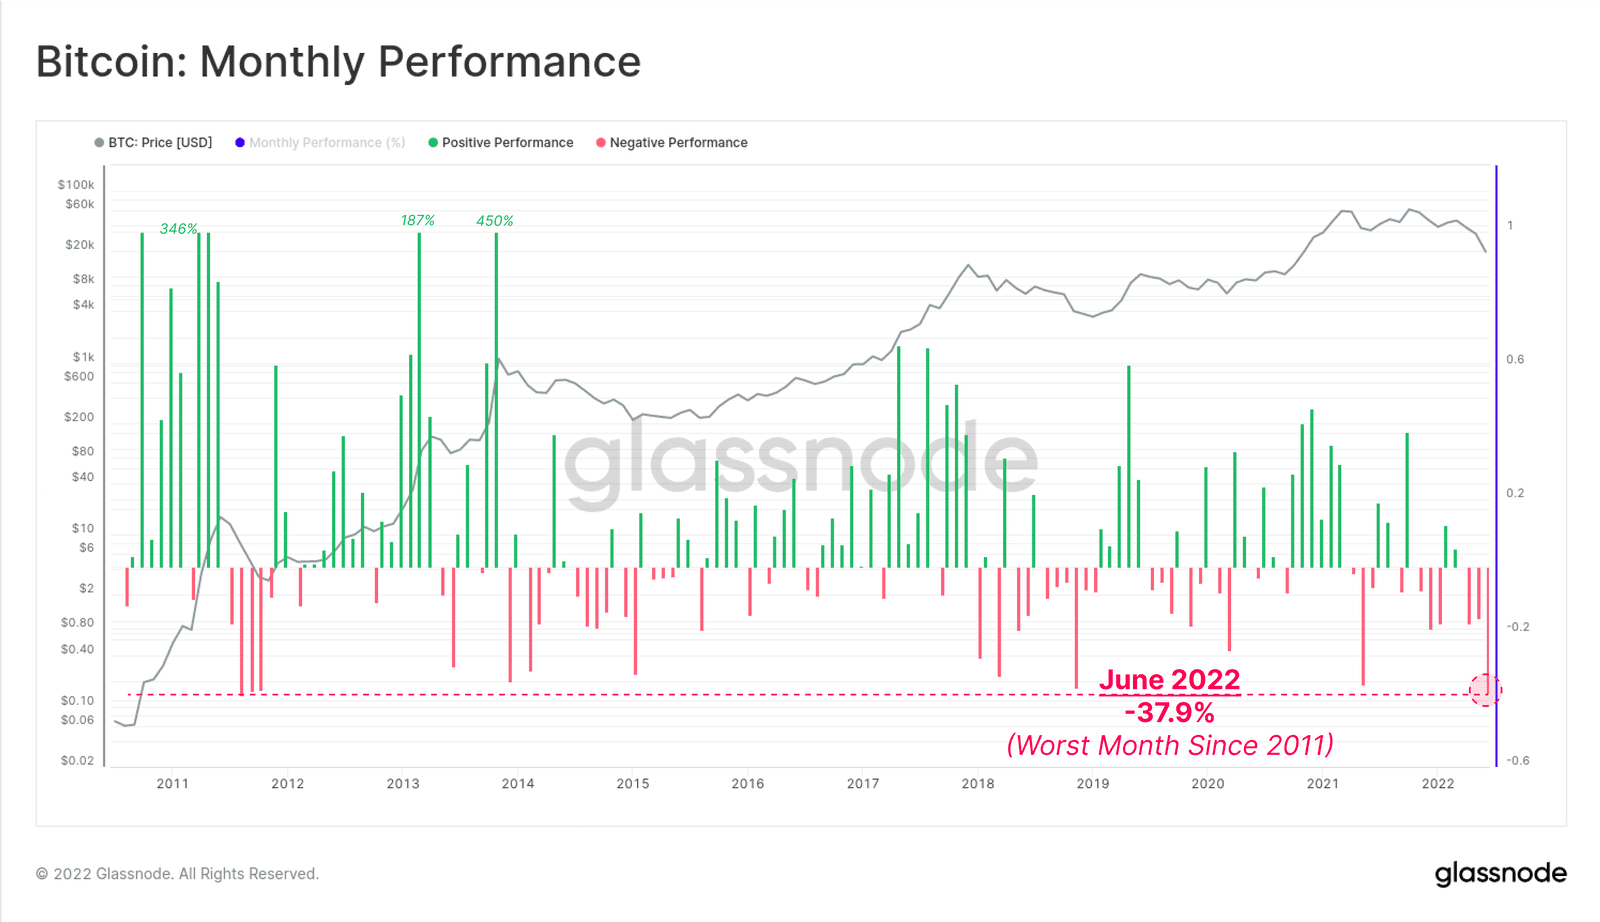 Bitcoin Monthly Performance. Source: Glassnode